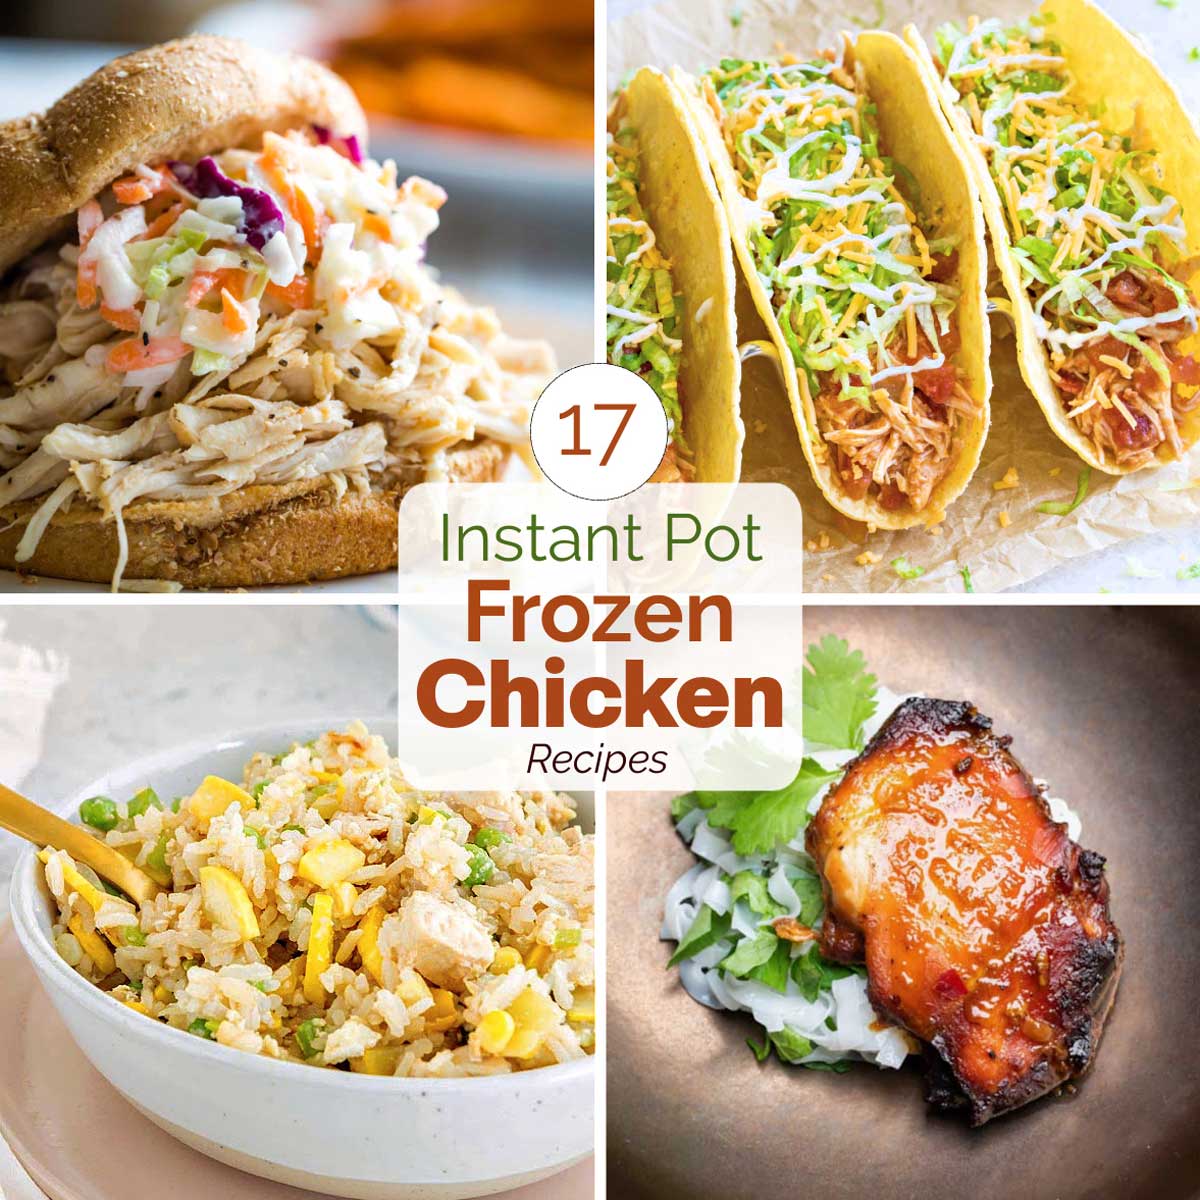 Square collage of 4 recipes with central text in brown and green "17 Instant Pot Frozen Chicken Recipes"